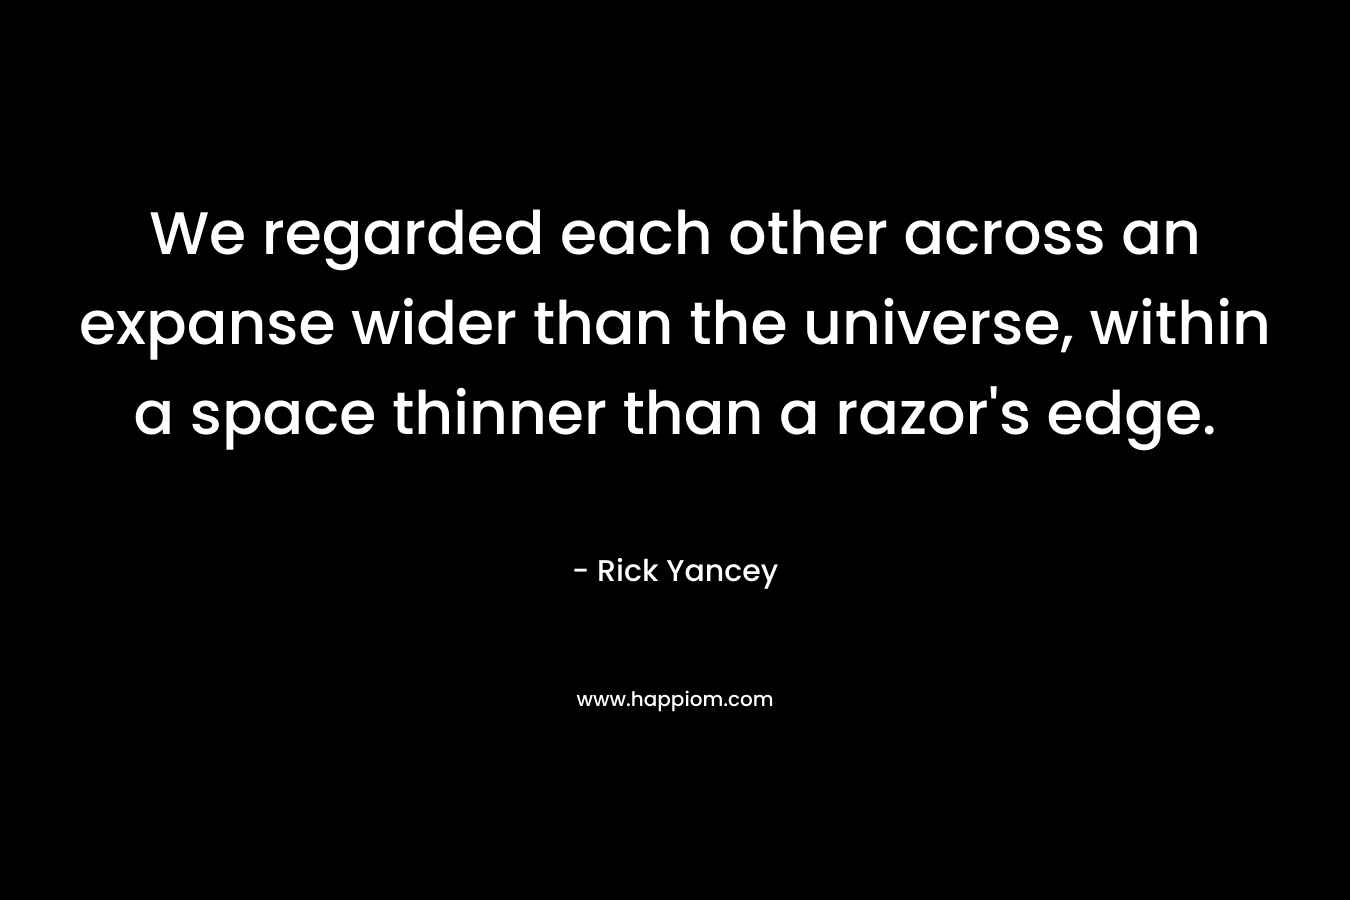 We regarded each other across an expanse wider than the universe, within a space thinner than a razor's edge.